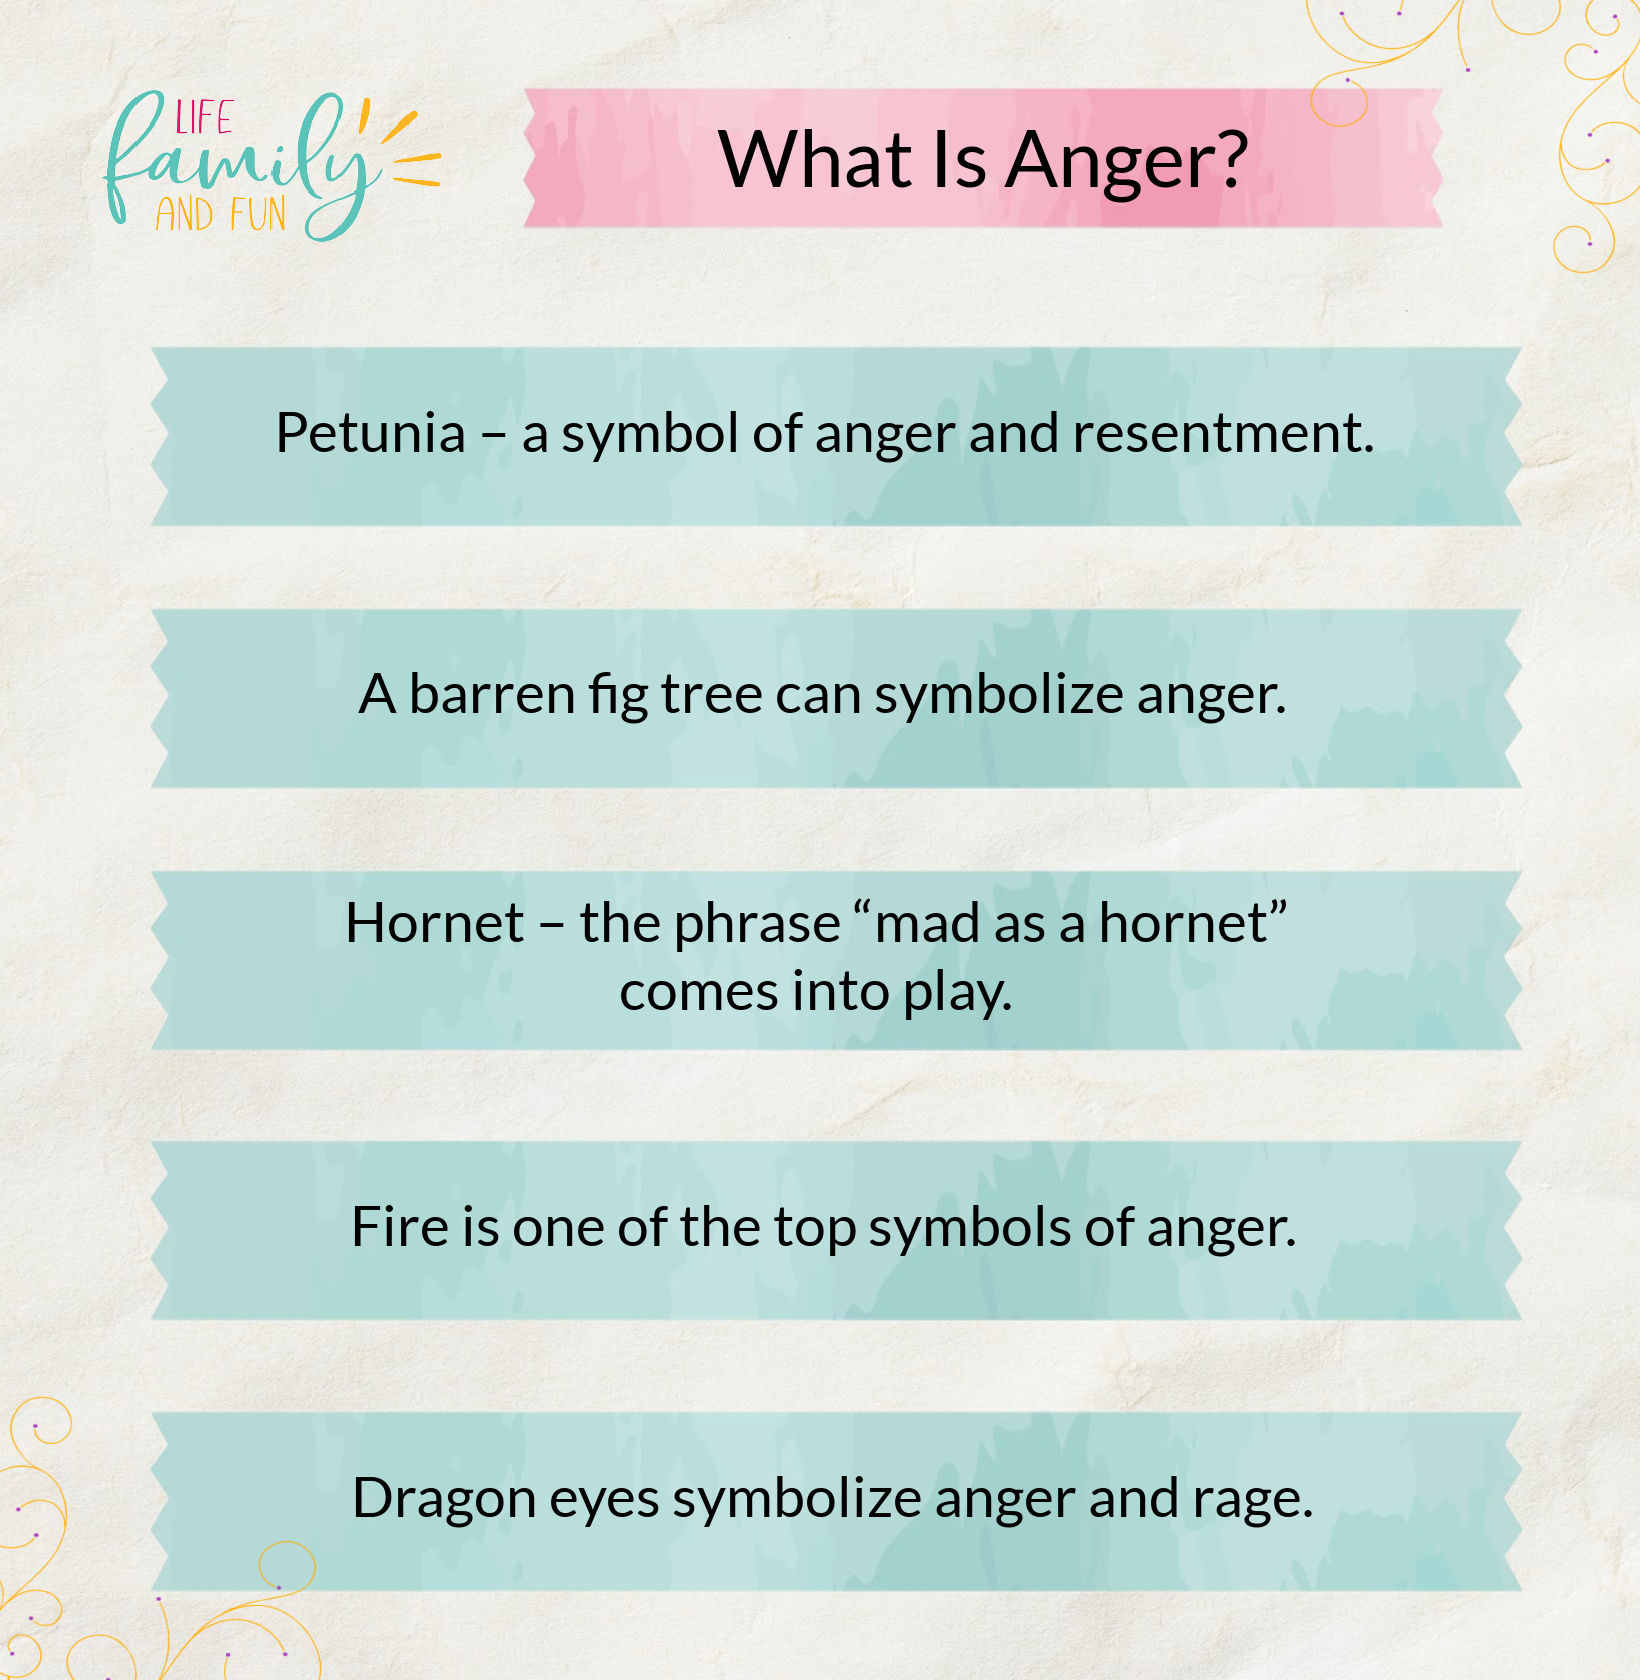 What Is Anger?